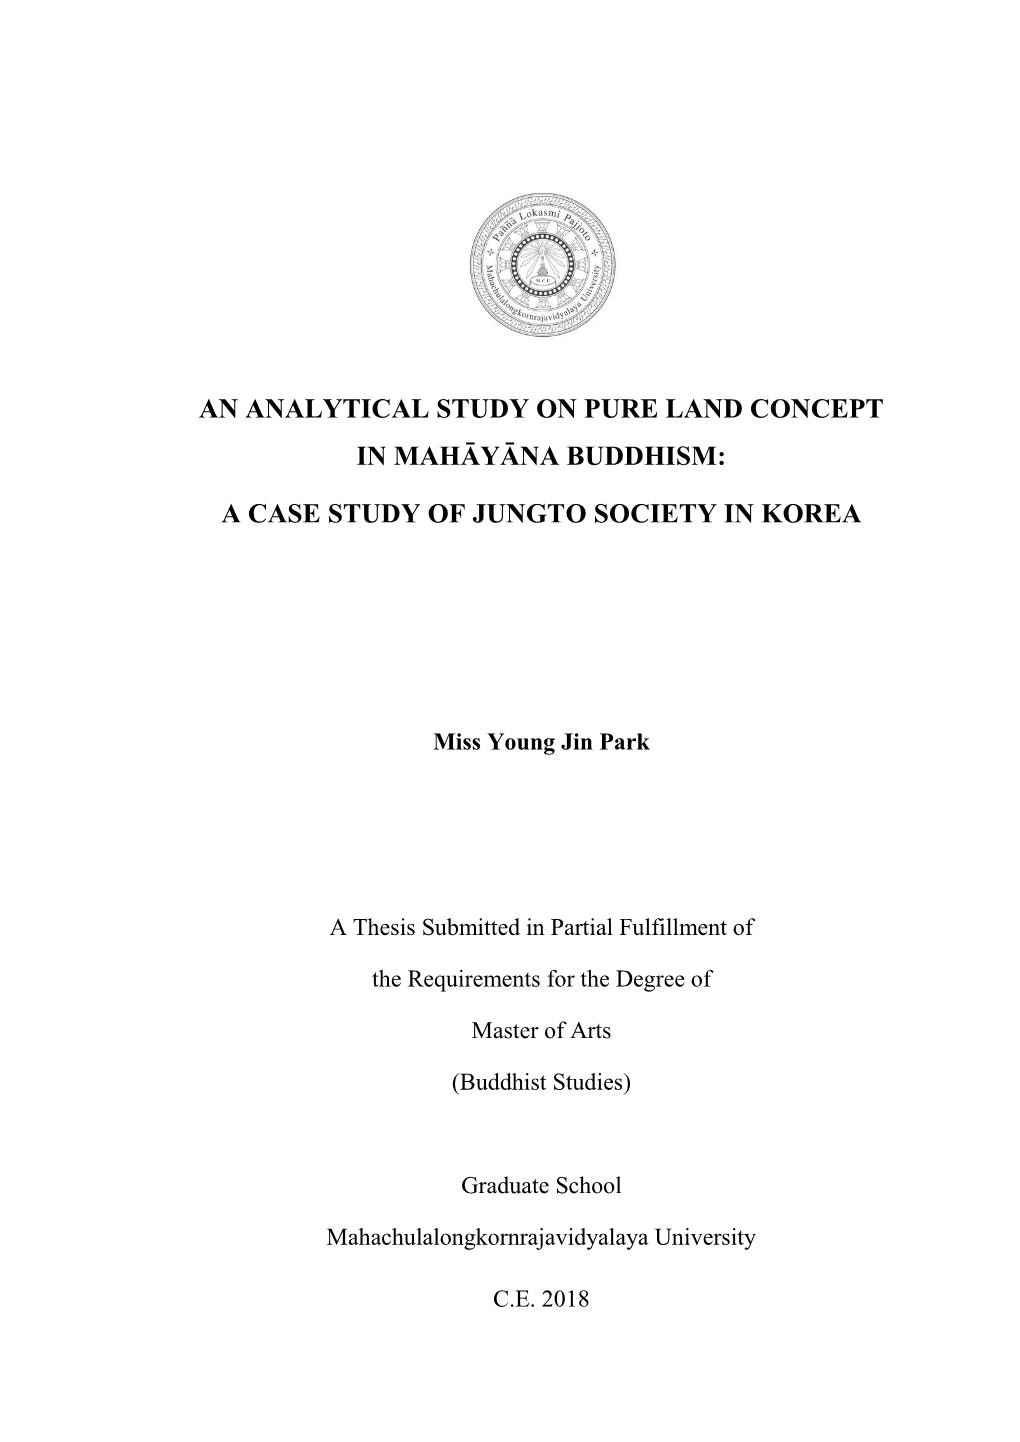 An Analytical Study on Pure Land Concept in Mahāyāna Buddhism